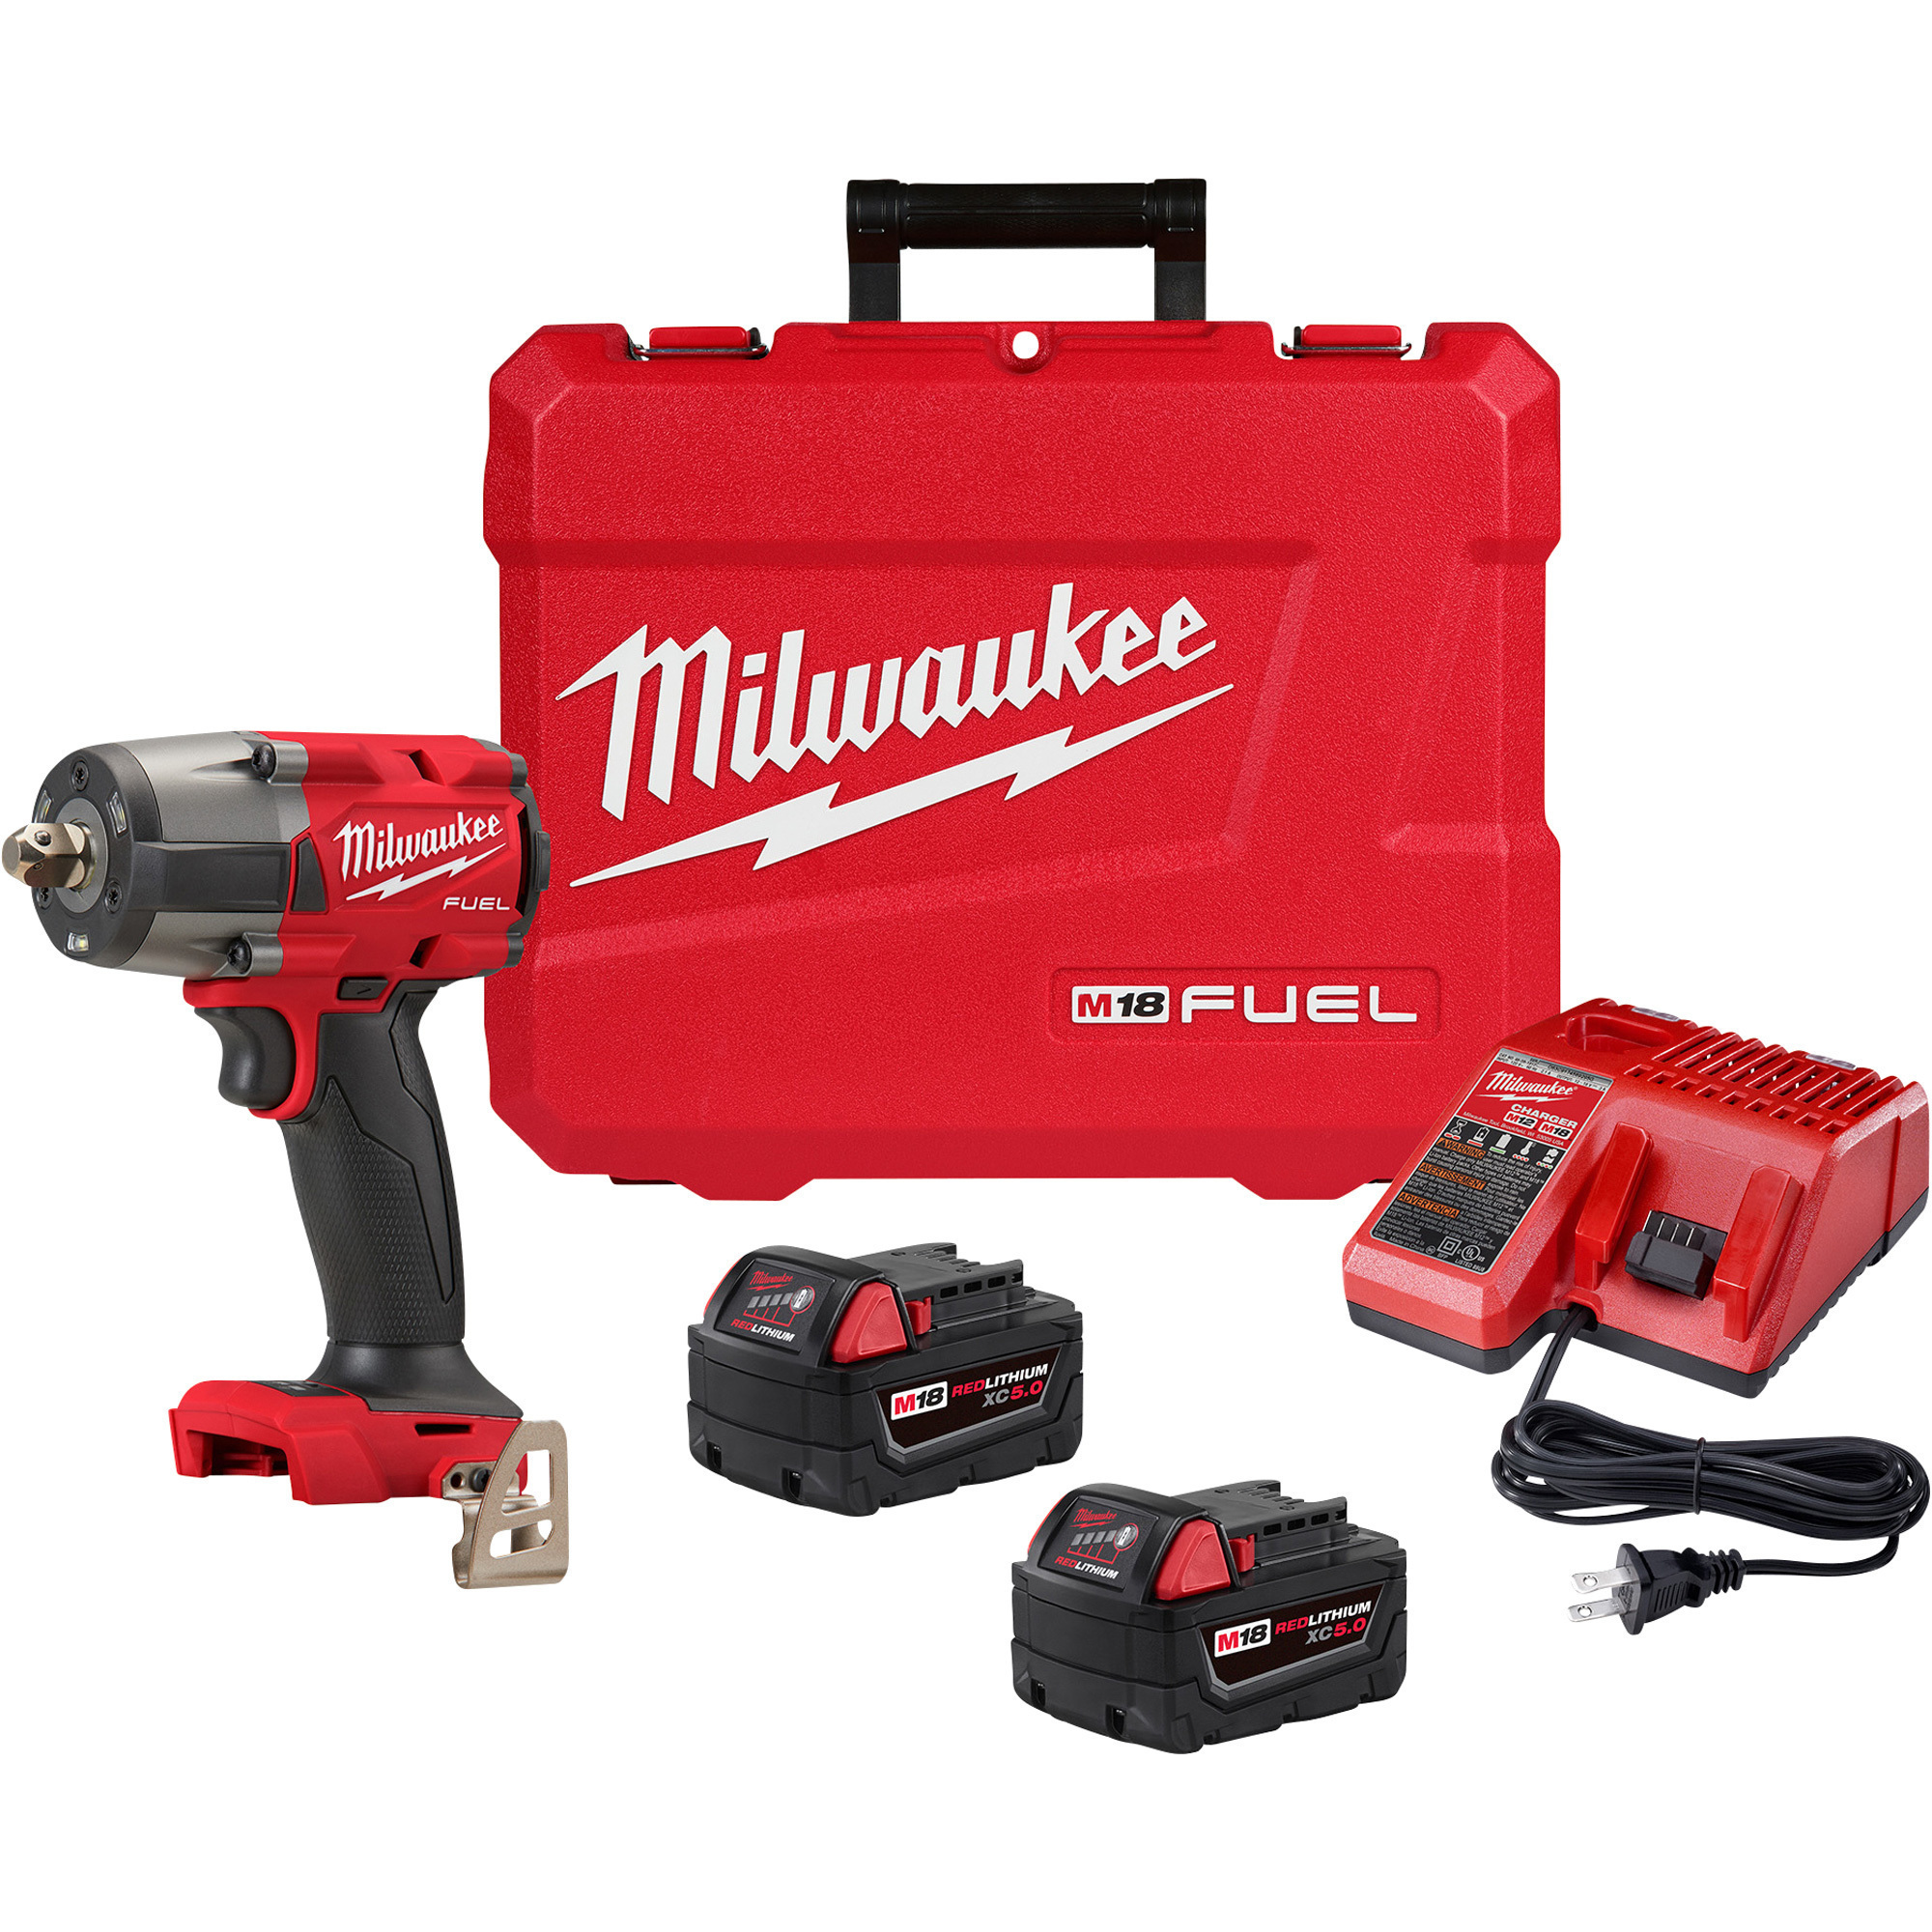 Milwaukee M18 FUEL Cordless Mid-Torque Impact Wrench with Pin Detent Kit, 1/2Inch Drive, 650 Ft./Lbs. Max Torque, 2 Batteries, Model 2962P-22R